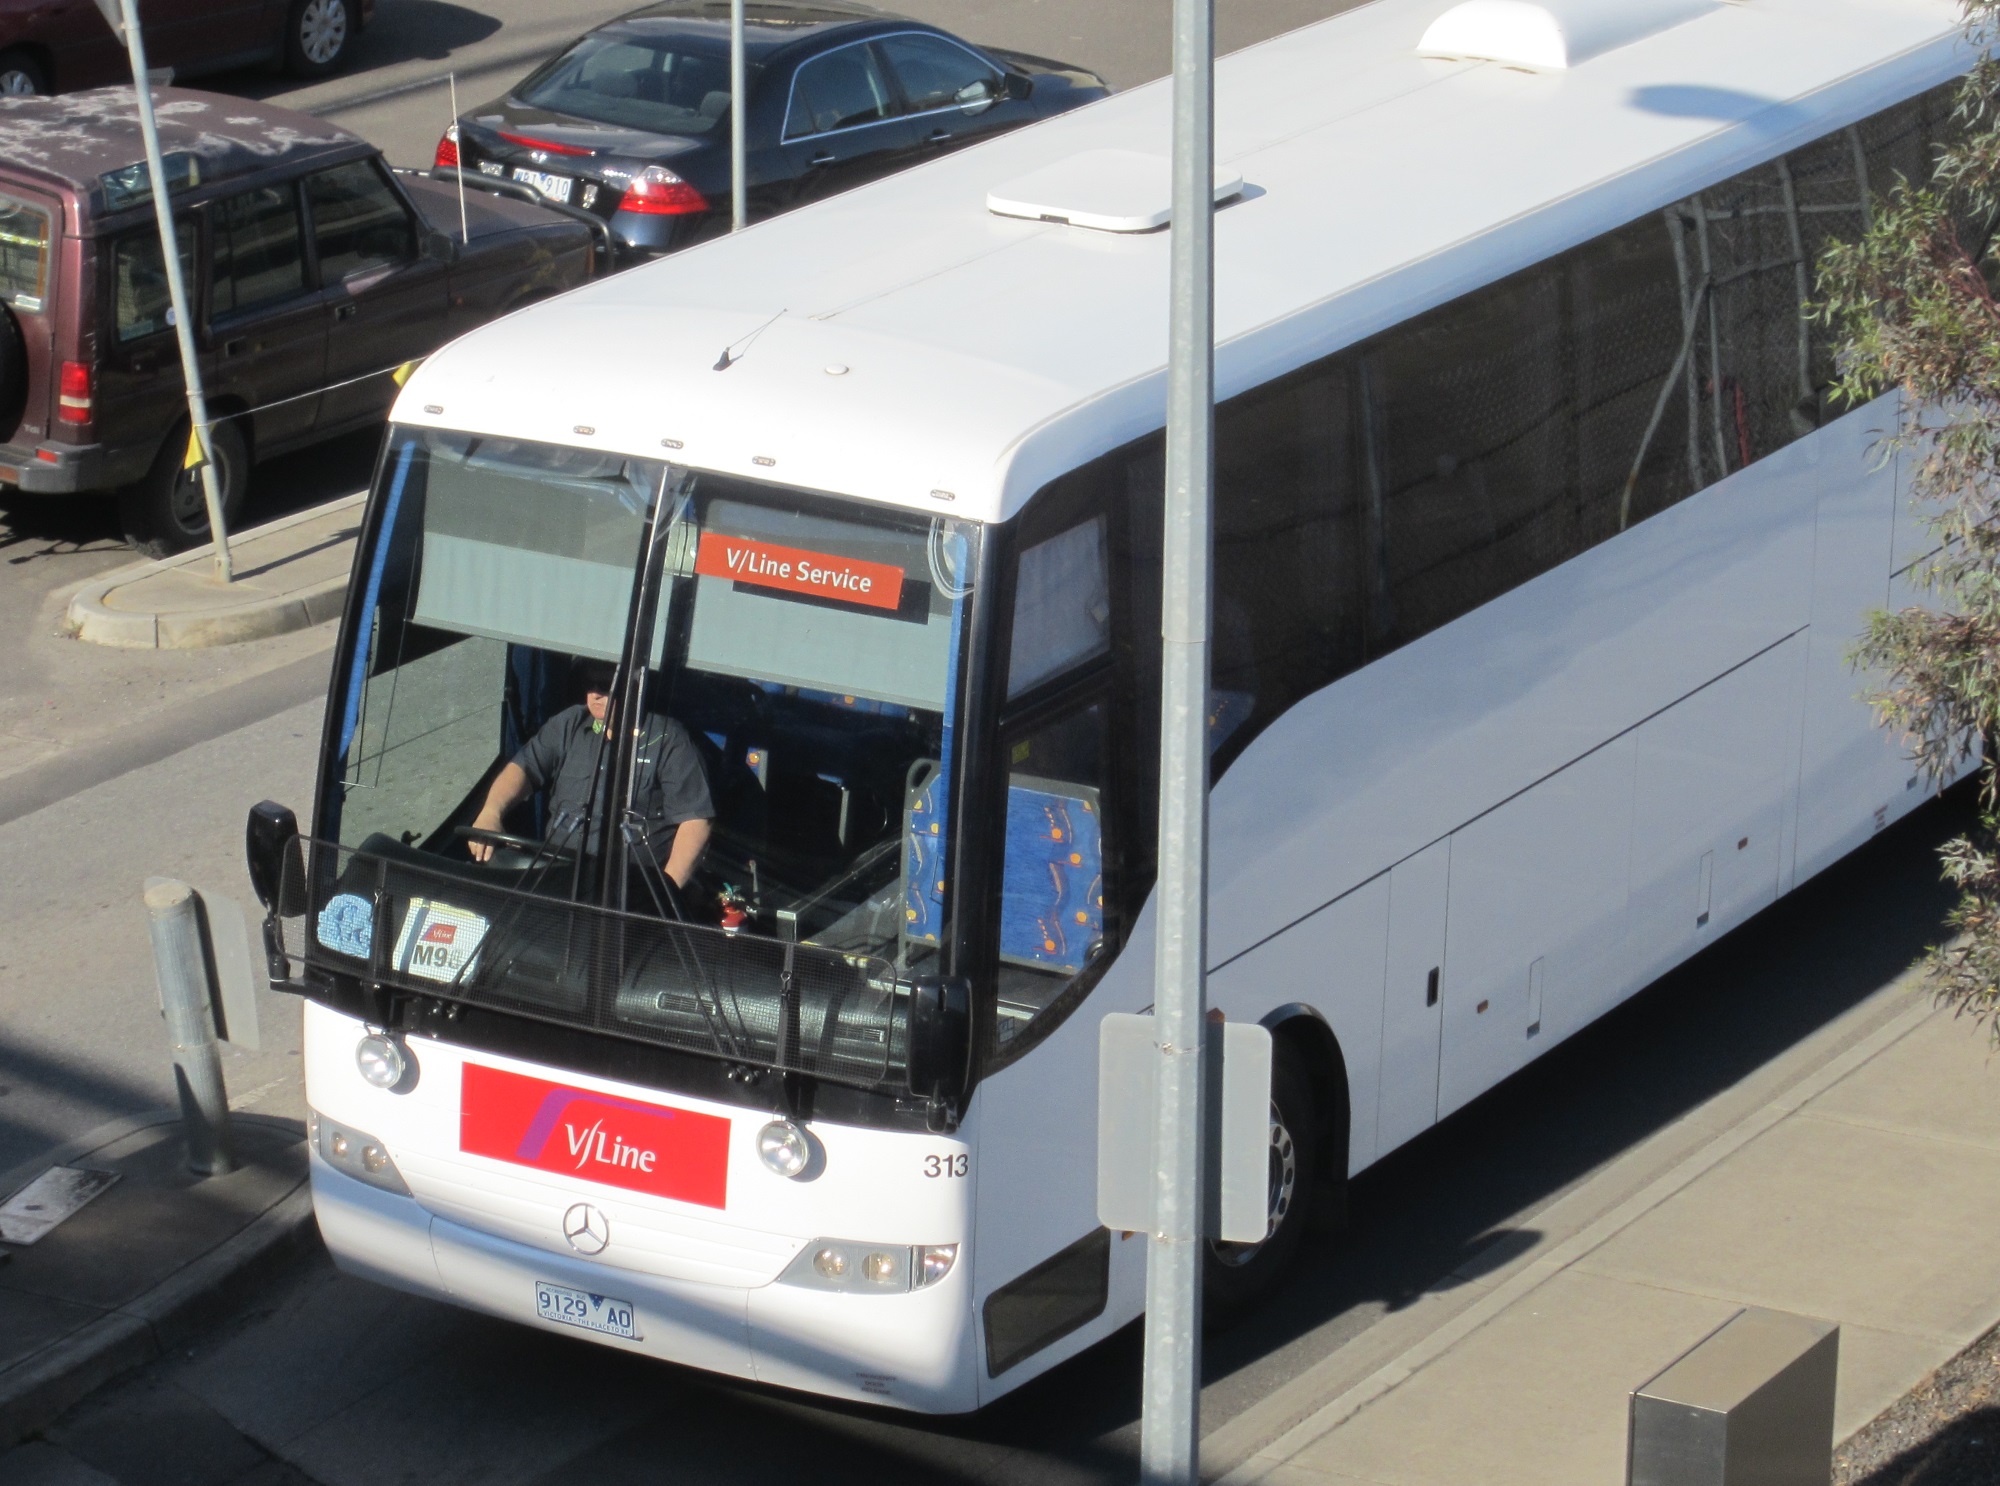 PTUA welcomes extra Night Coach services